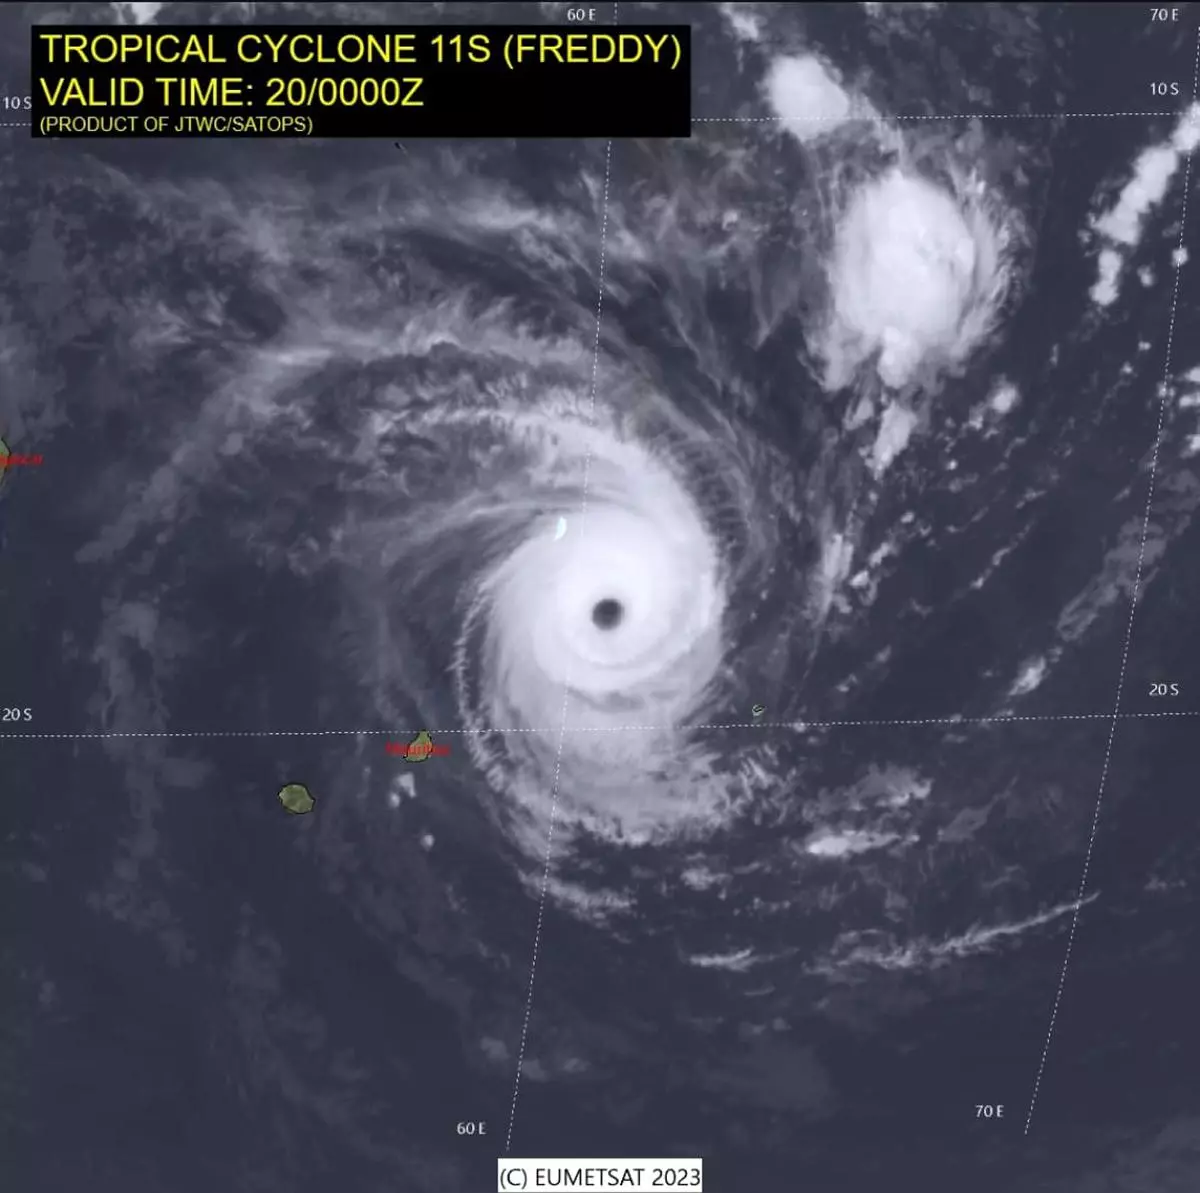 Screen grab of intense cyclone Freddy over the South-West Indian Ocean featured an eye at the centre, indicating its strength and intensity